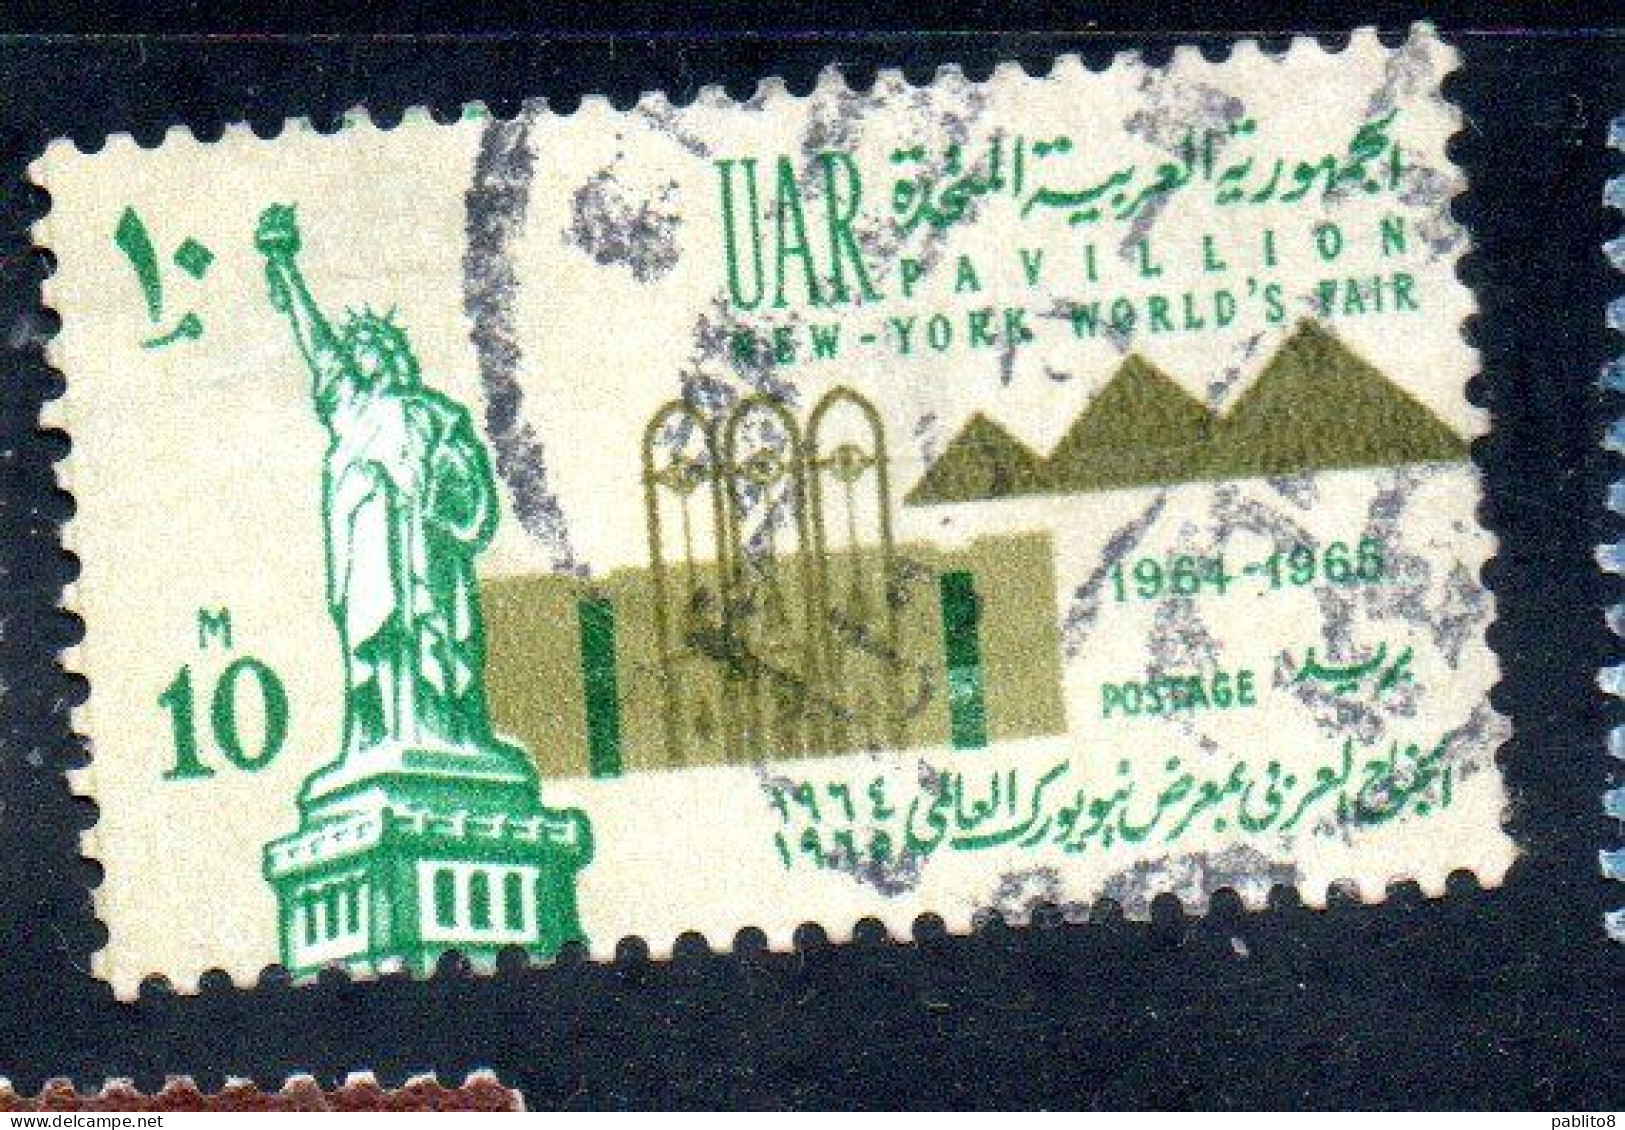 UAR EGYPT EGITTO 1964 NEW YORK WORLD'S FAIR STATUE OF LIBERTY PAVILION AND PYRAMIDS 10m USED USATO OBLITERE' - Used Stamps